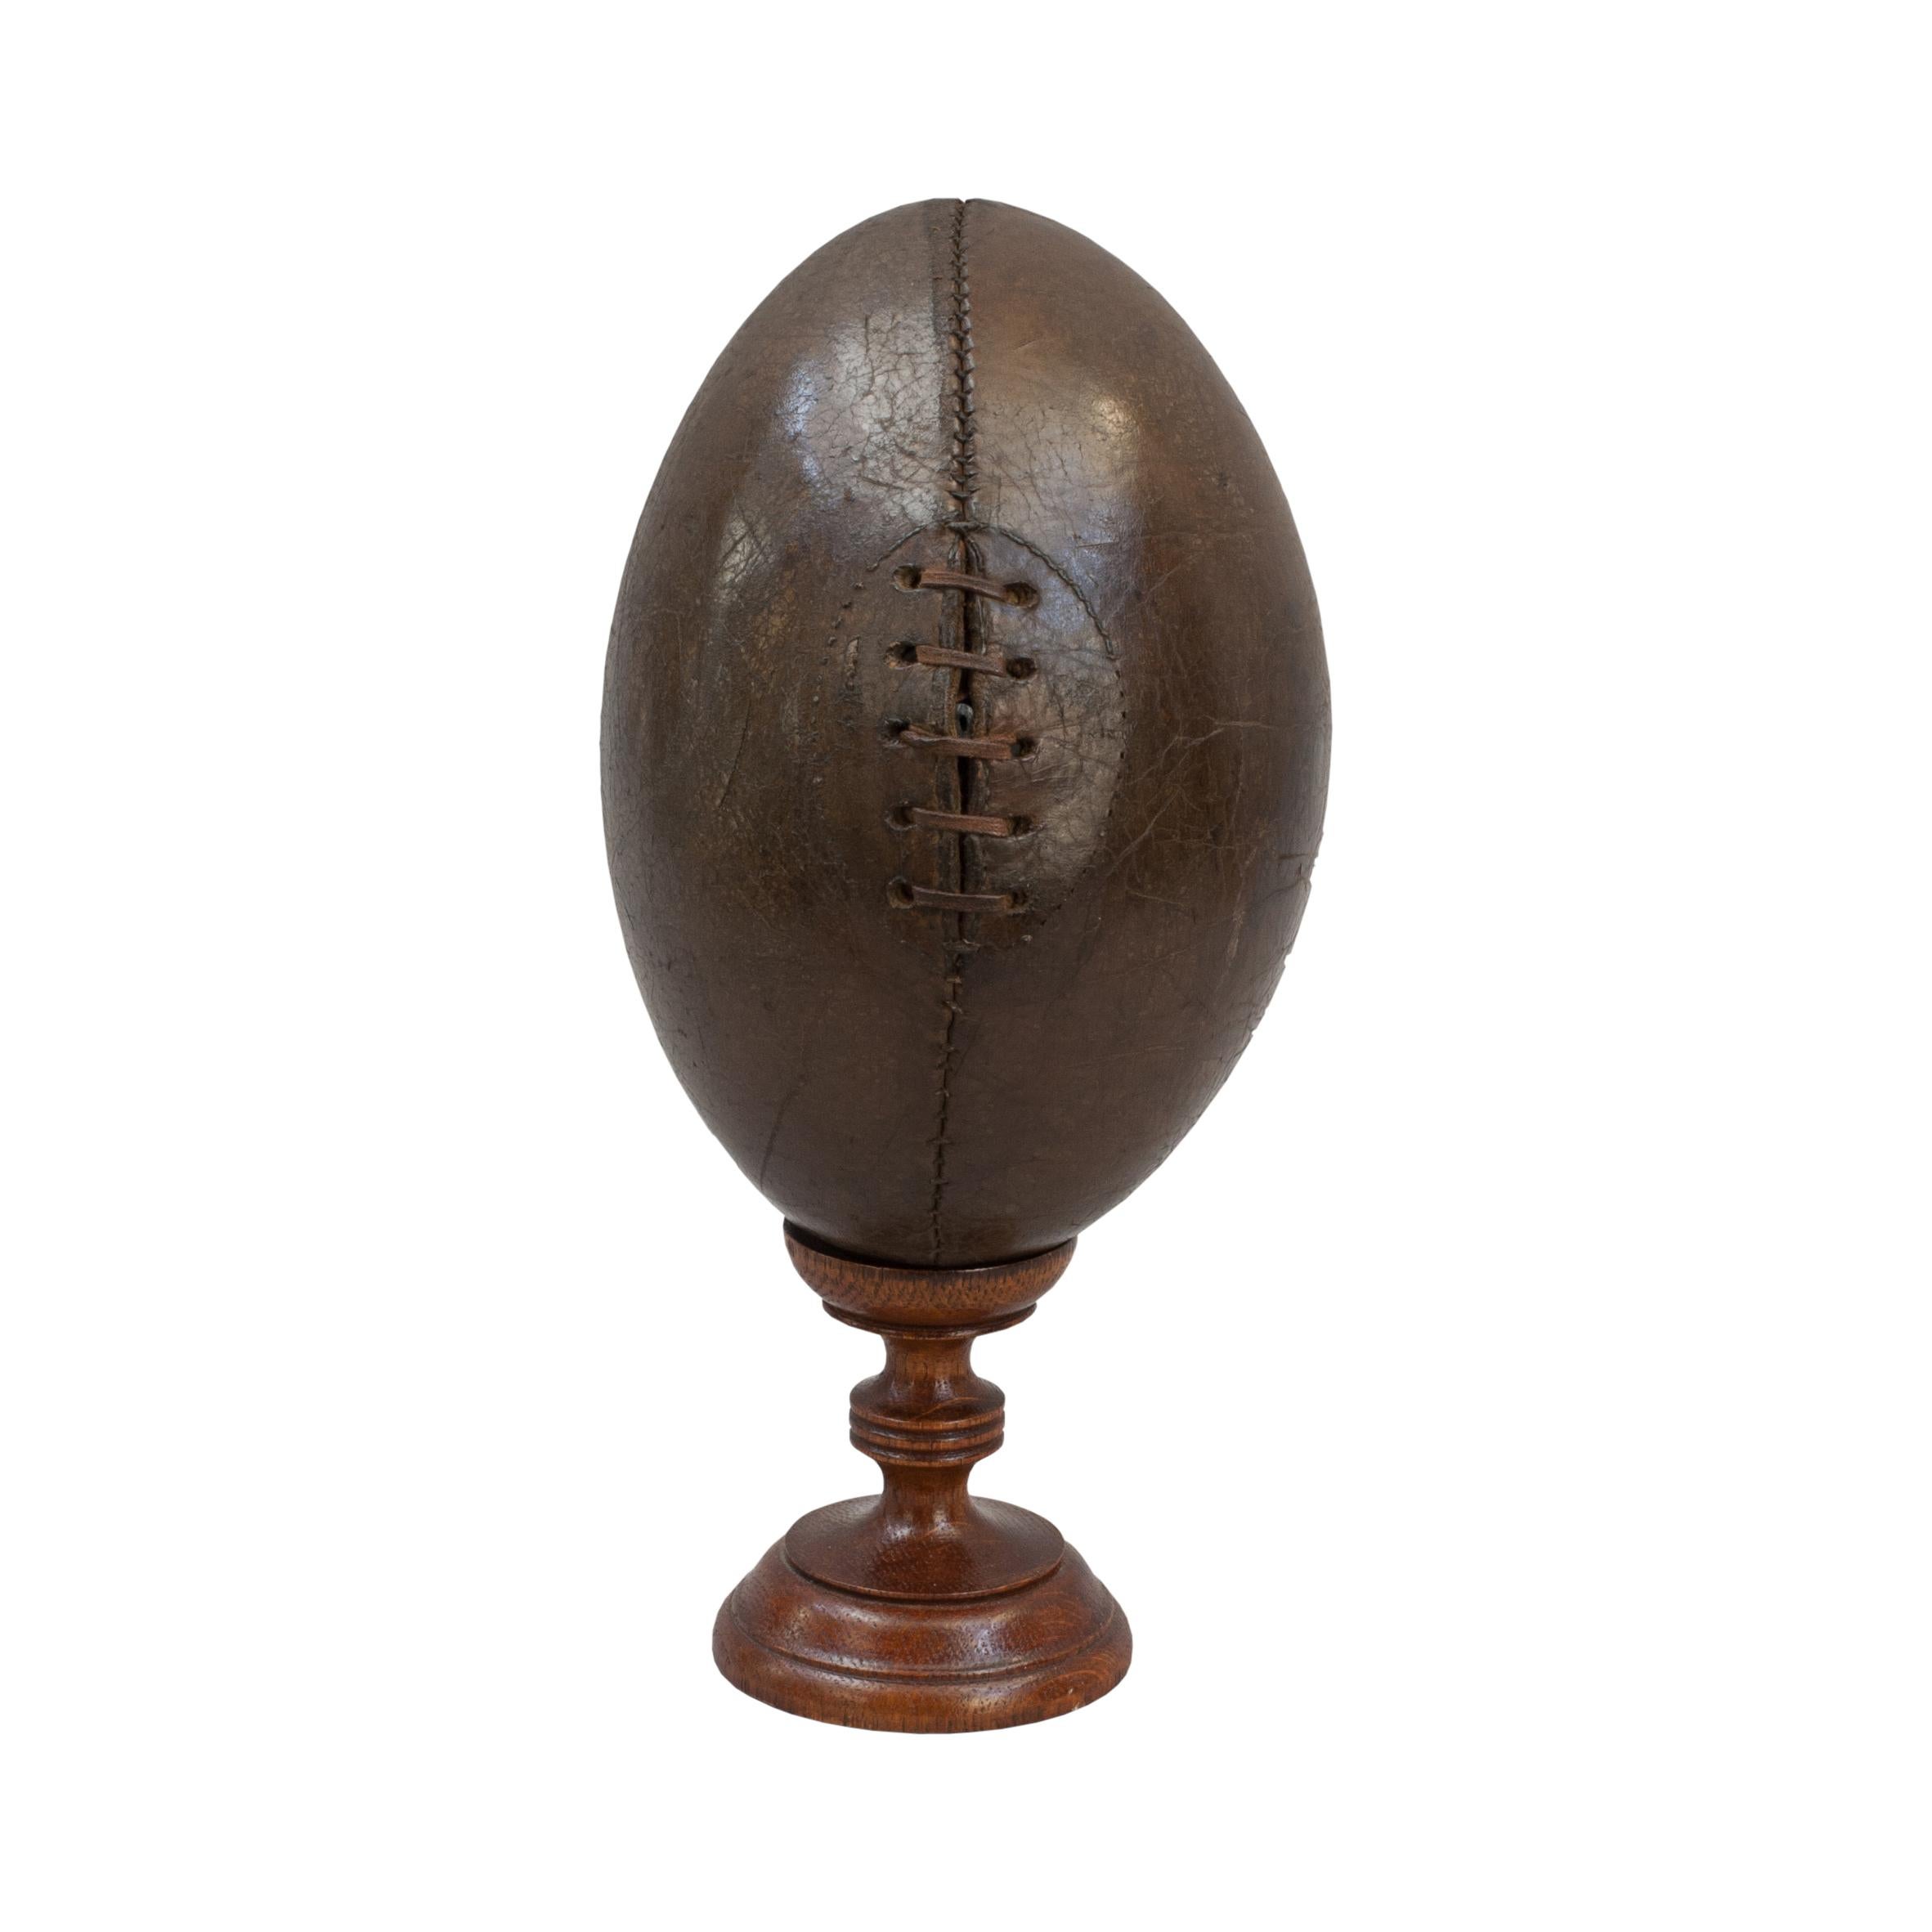 Original Antique Leather Rugby Ball.
A beautiful leather rugby ball made with the traditional four leather panels with good dark colour and patina. The ball has a lace-up slit to the front that would have enabled bladder inflation, there is an